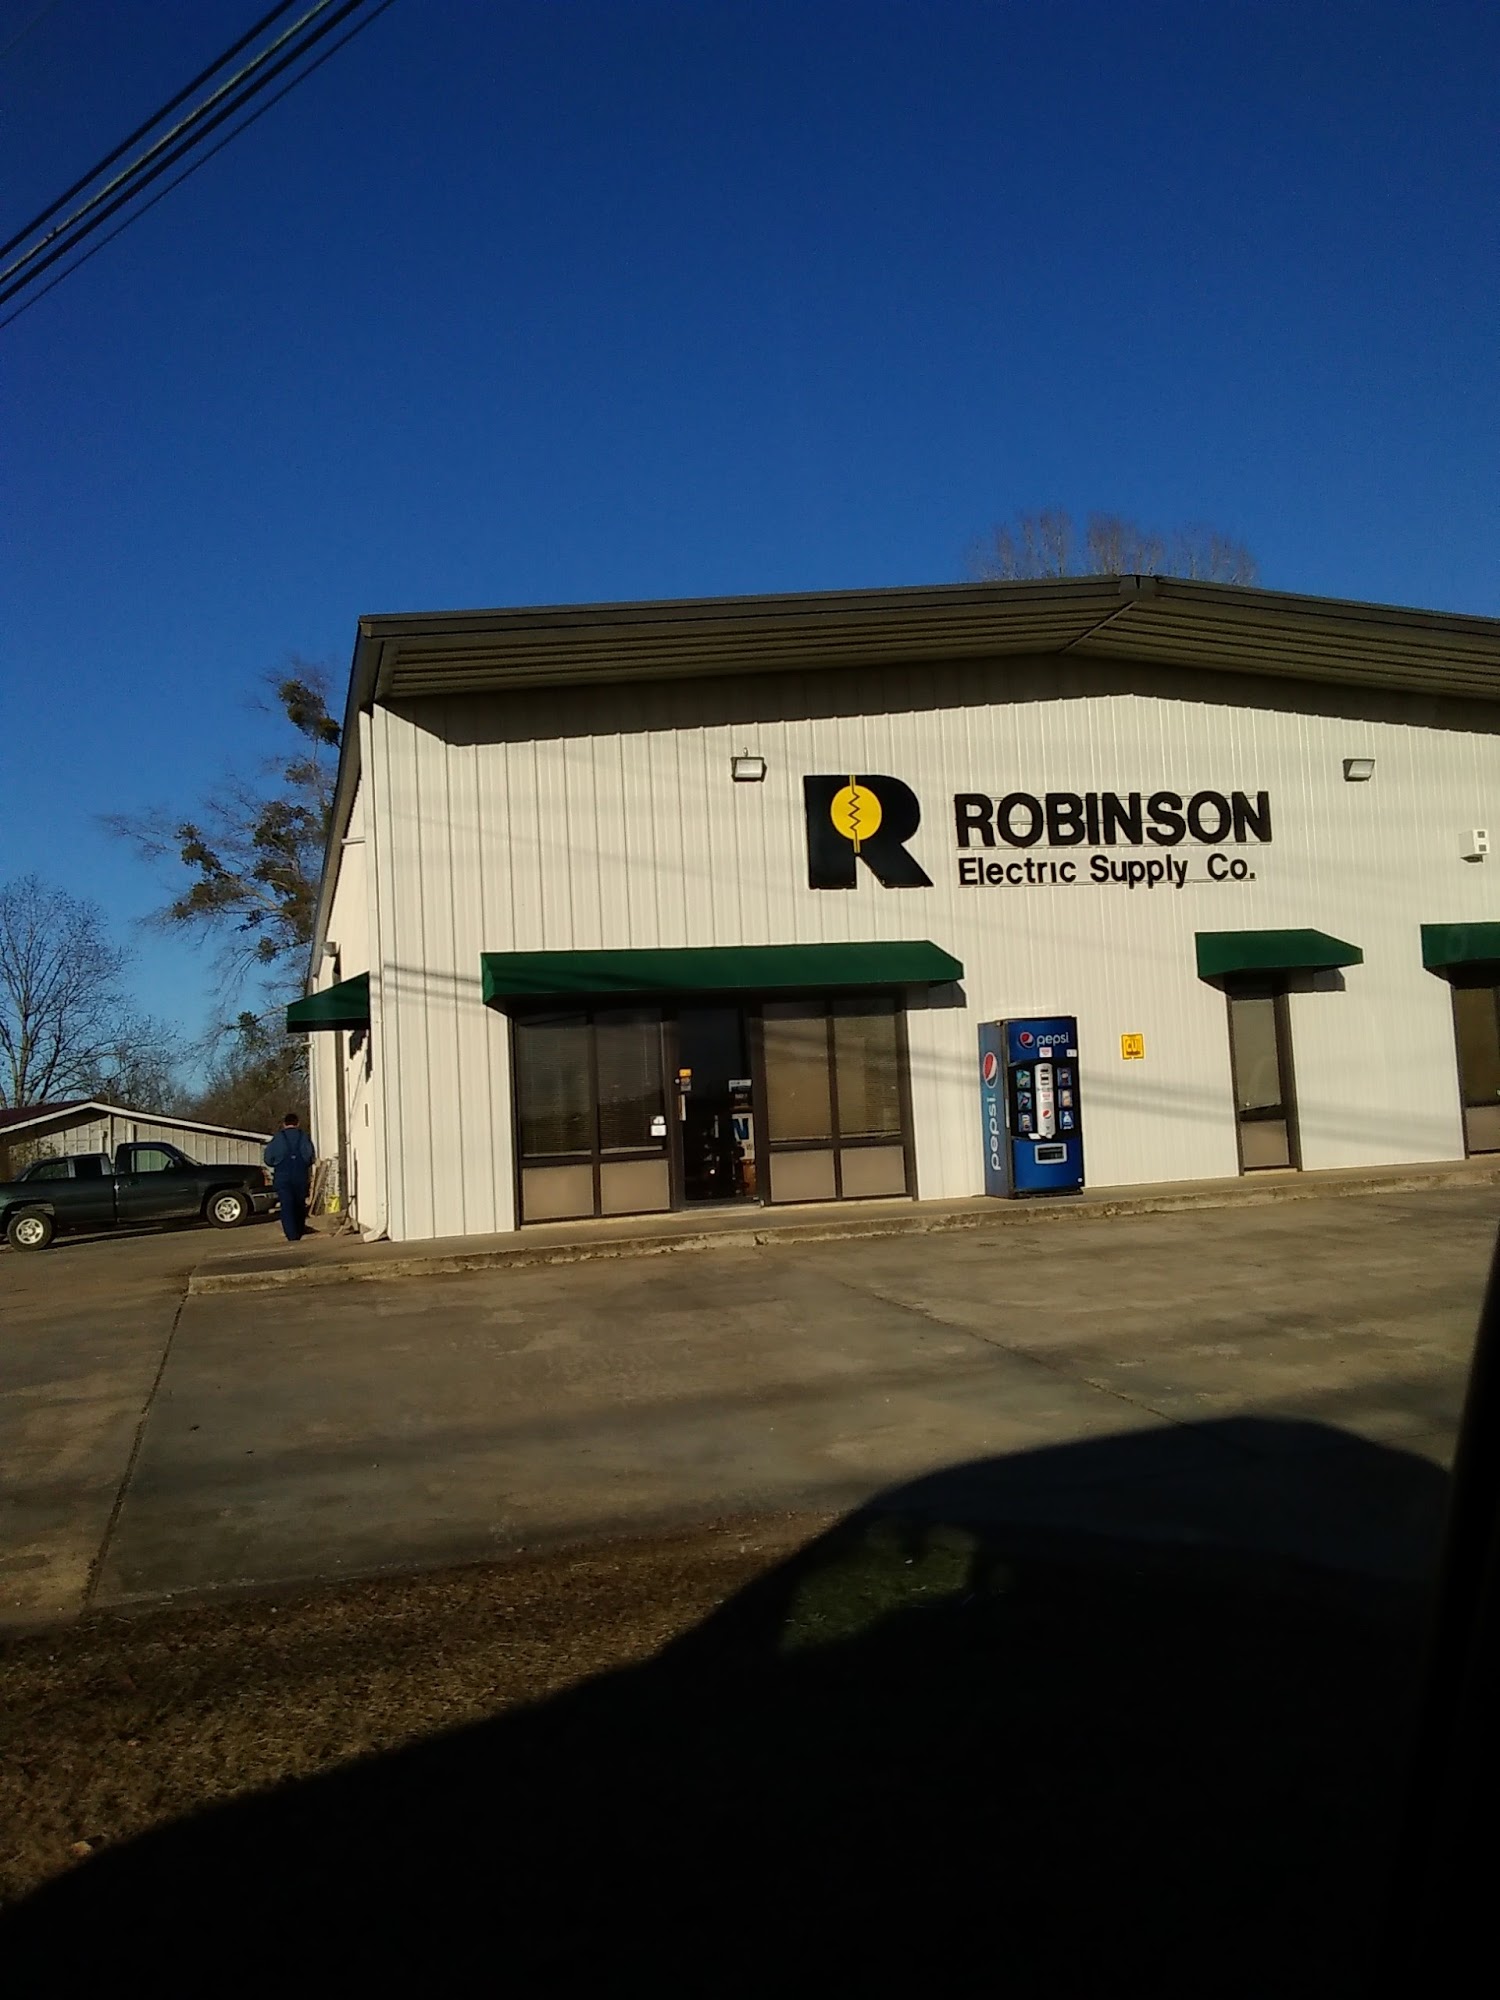 Robinson Electric Supply Co